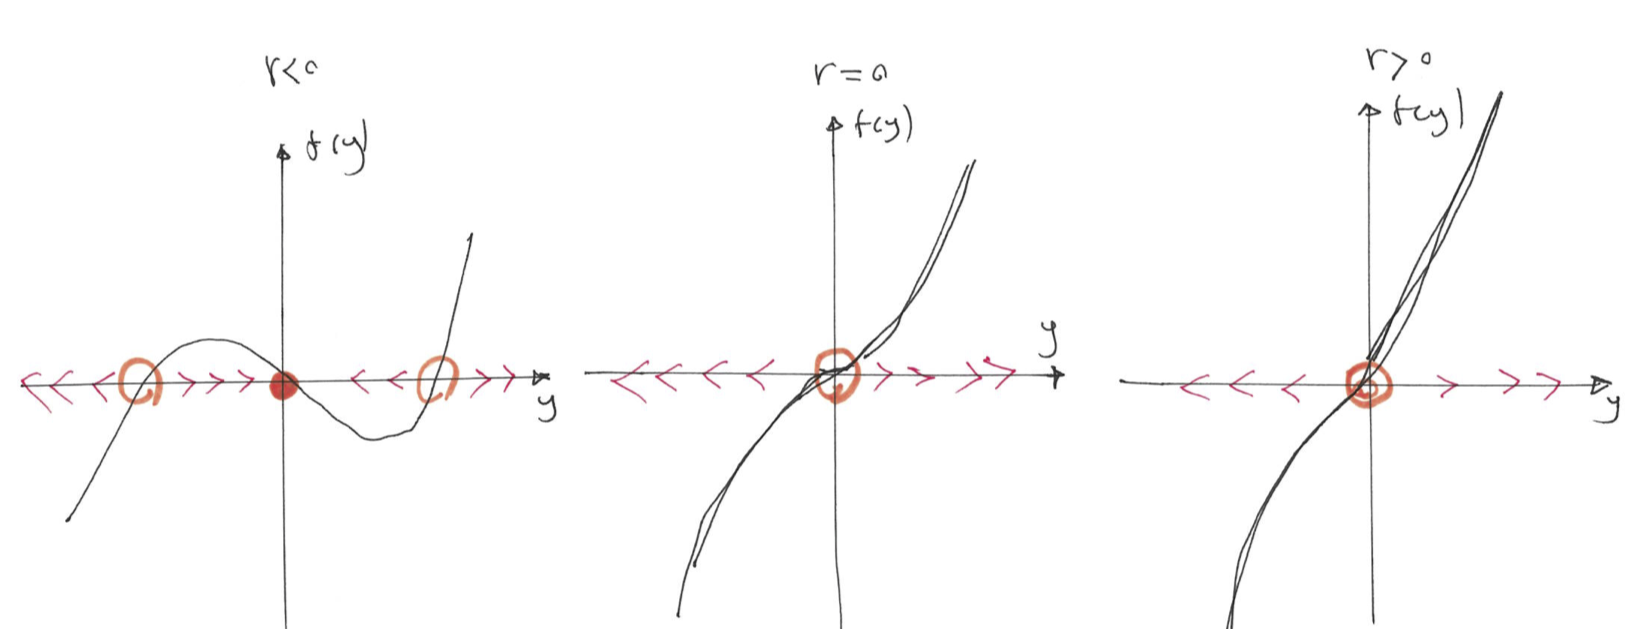 The plot of $f(y)$ vs $y$ for different values of $r$, illustrates the vector field and the stability of the fixed point for subcritical pitchfork bifurcation.